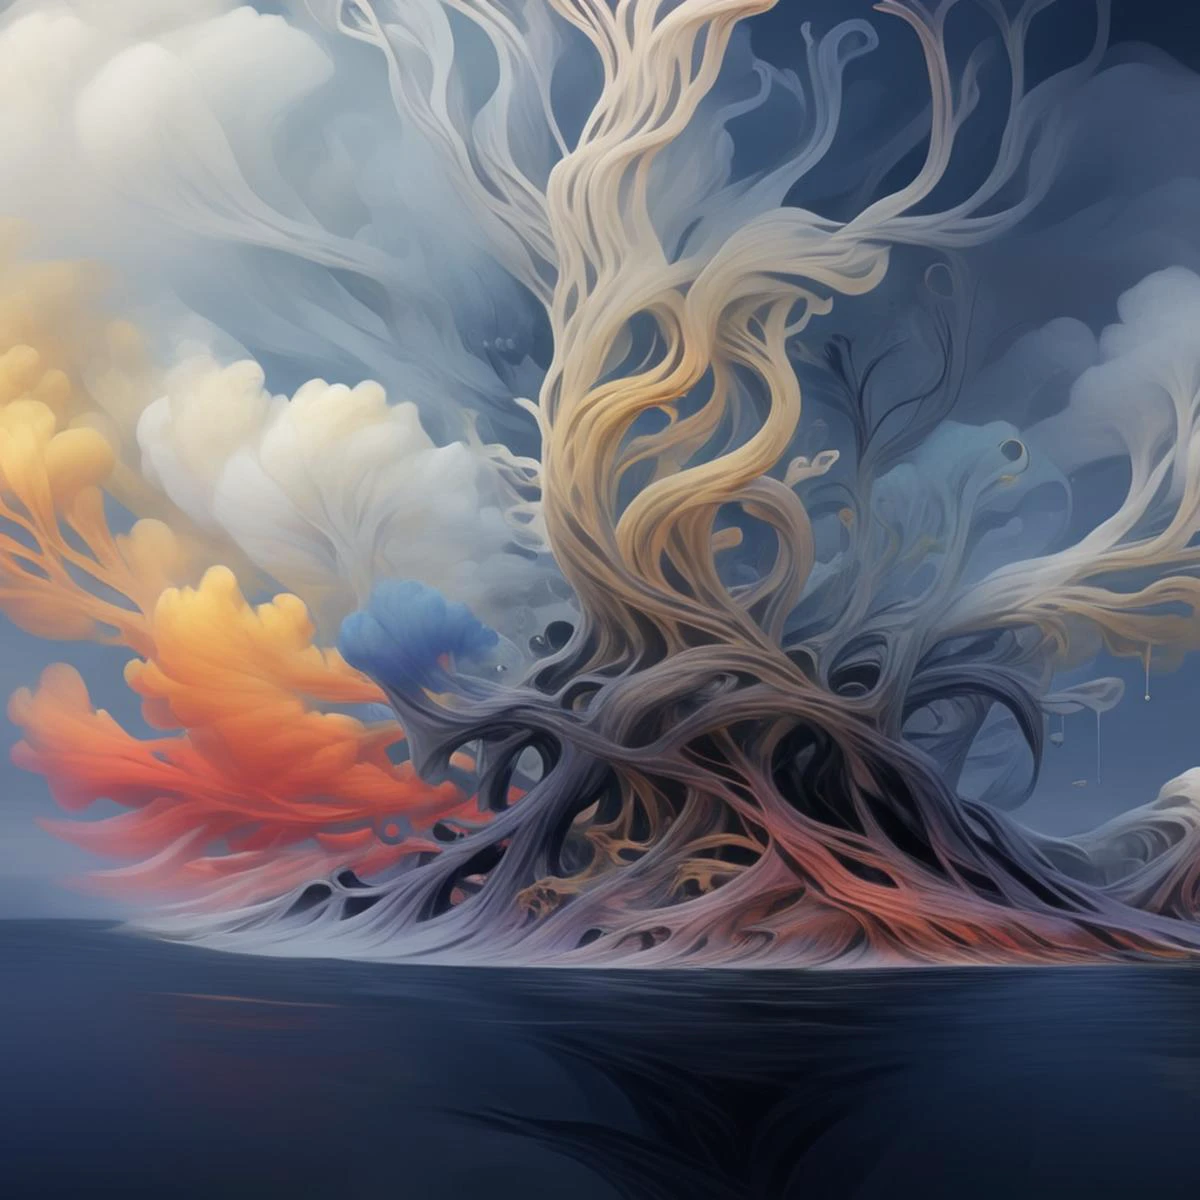 arttrlsn, , An ethereal cloud tree with roots and branches that form into various shapes, colorful, concept design for fantasy game, creating an otherworldly atmosphere. The branches of clouds form unique shapes and colors, creating the illusion it is growing from within them. The background features dark tones to contrast the bright colors of the cloudlike branches., detailed, high resolution, smoke billows from its base, symbolizing both chaos and beauty in nature. This concept could be used as a digital art piece or for fantasy book cover design in the style of various artists., symbolizing growth in various areas such as creativity or personal development. Digital art style, the colors of flames glow red, the overall color scheme has light tones. The digital art style creates a mysterious atmosphere in the style of digital art., the sky above is dark blue, the trunk is shaped like an island surrounded by water, white clouds form in various shapes, yellow and orange, An ethereal cloud tree with roots that wind through the sky, A cloud tree with roots that twist and wind